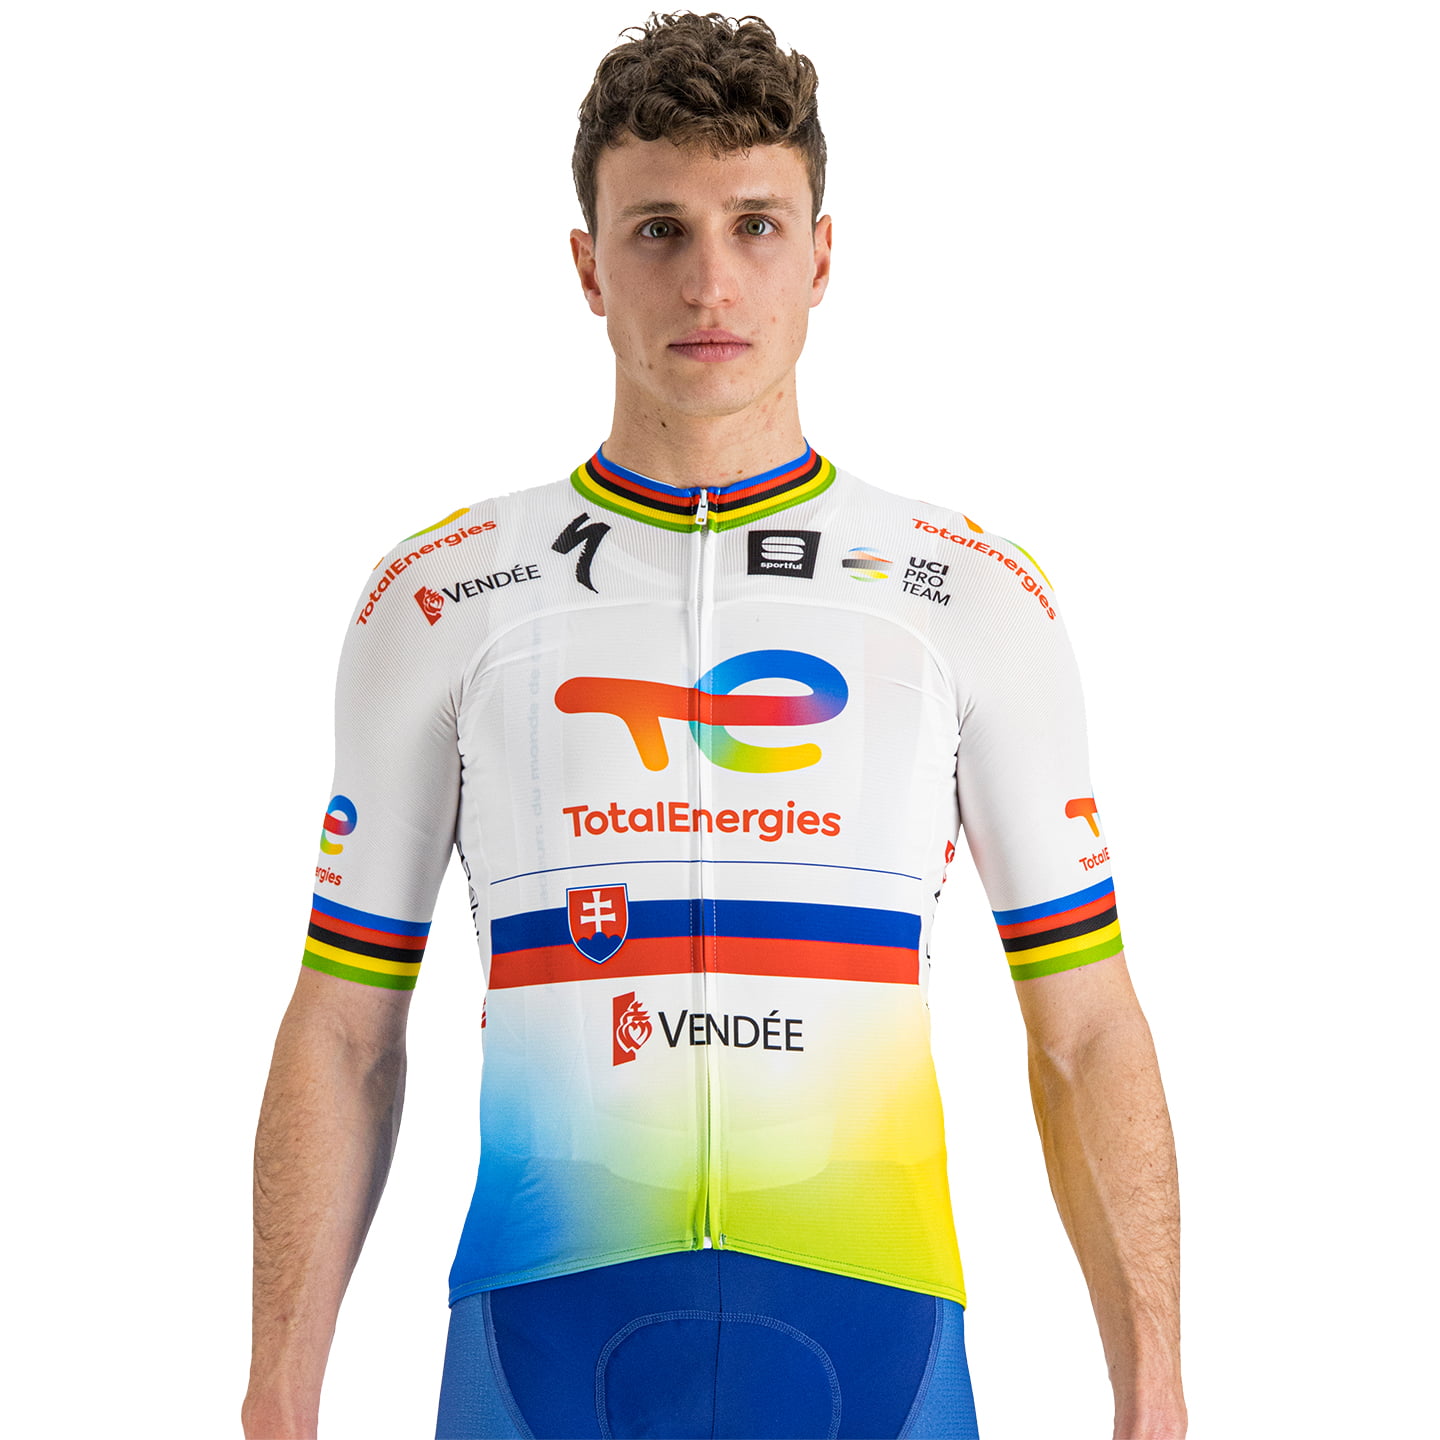 TOTALENERGIES Short Sleeve Ex World Champion 2023 Jersey, for men, size XL, Bike Jersey, Cycle gear